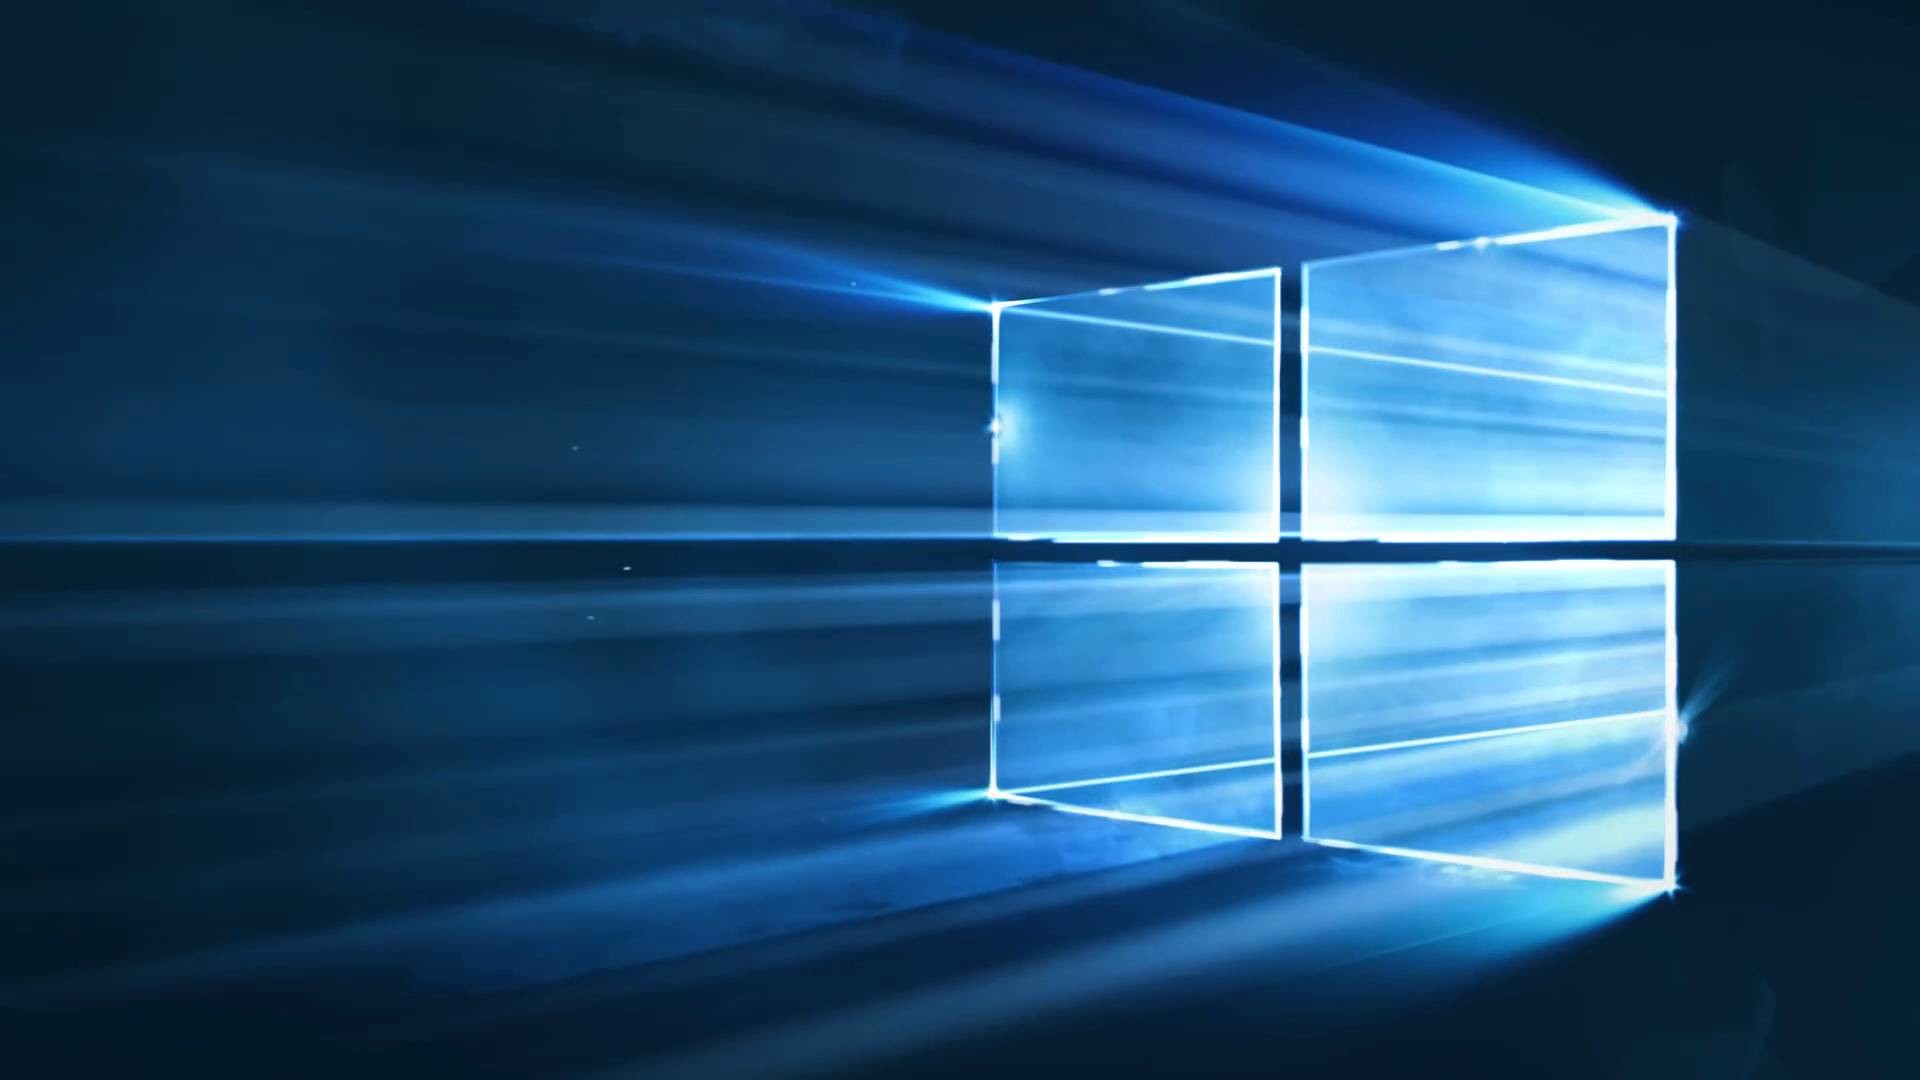 Animated Wallpapers Windows 10